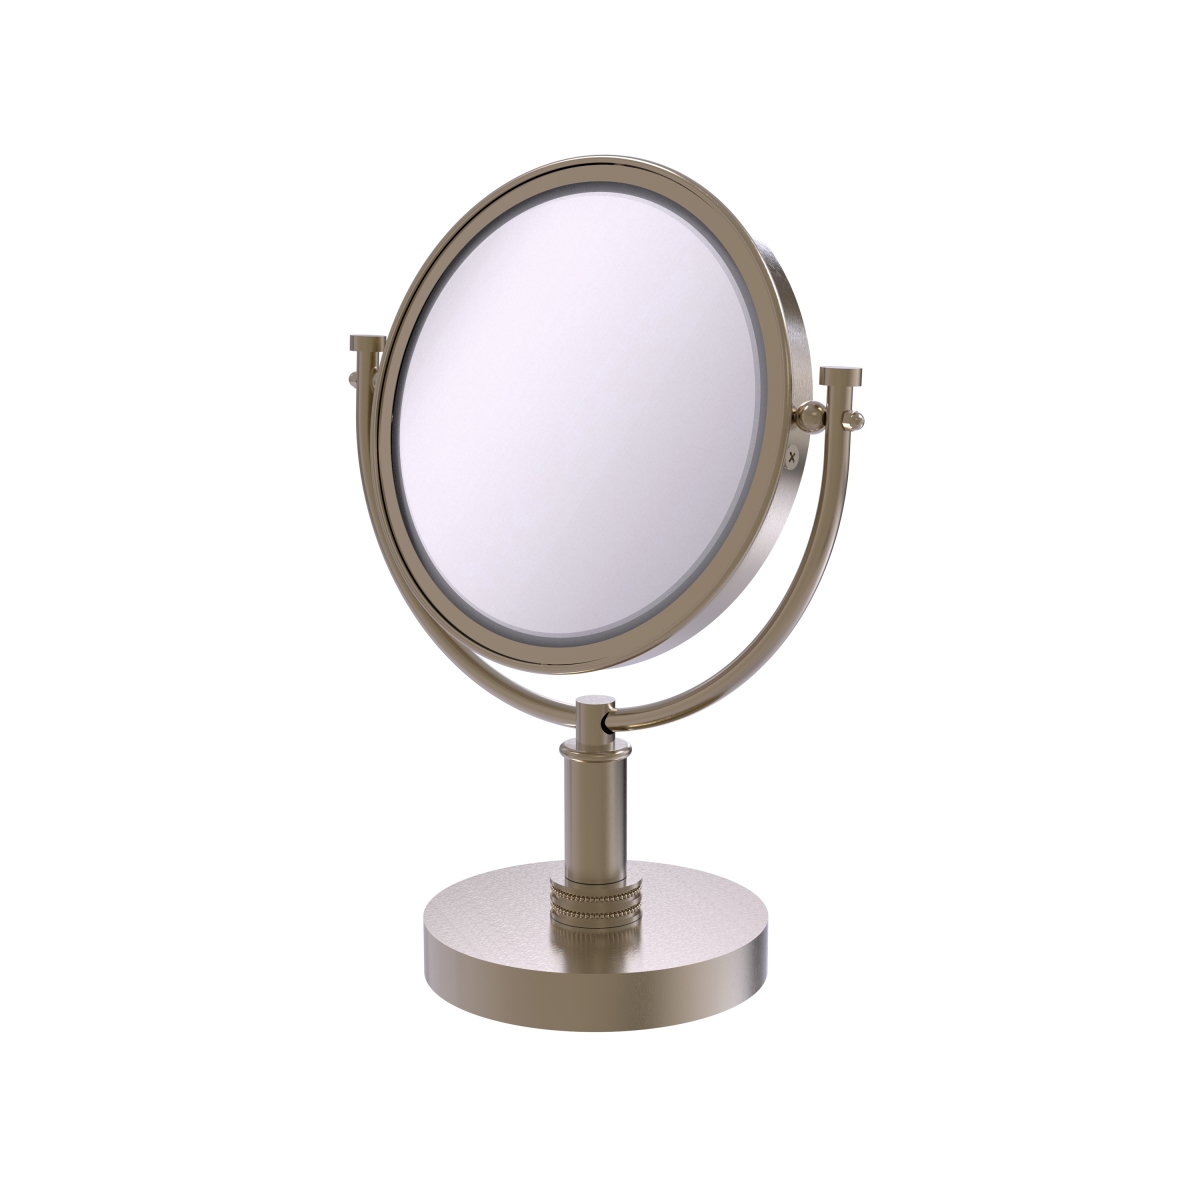 Picture of Allied Brass DM-4D-4X-PEW 8 in. Vanity Top Make-Up Mirror 4X Magnification, Antique Pewter - 15 x 8 x 8 in.